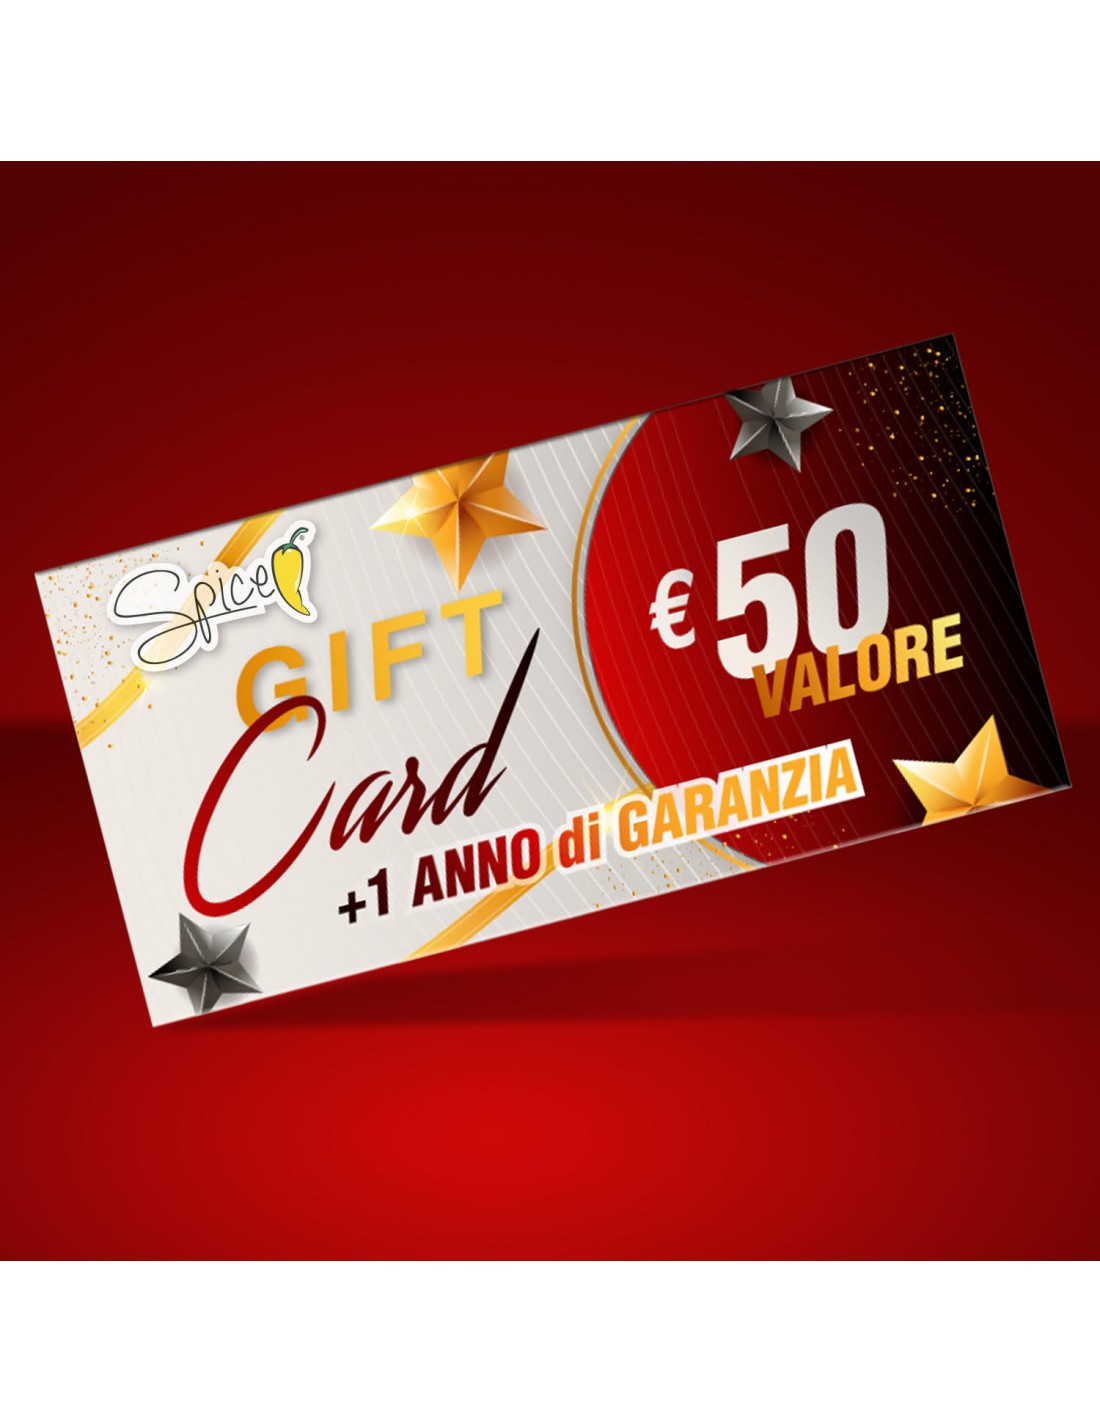 Gift Card Spice € 50